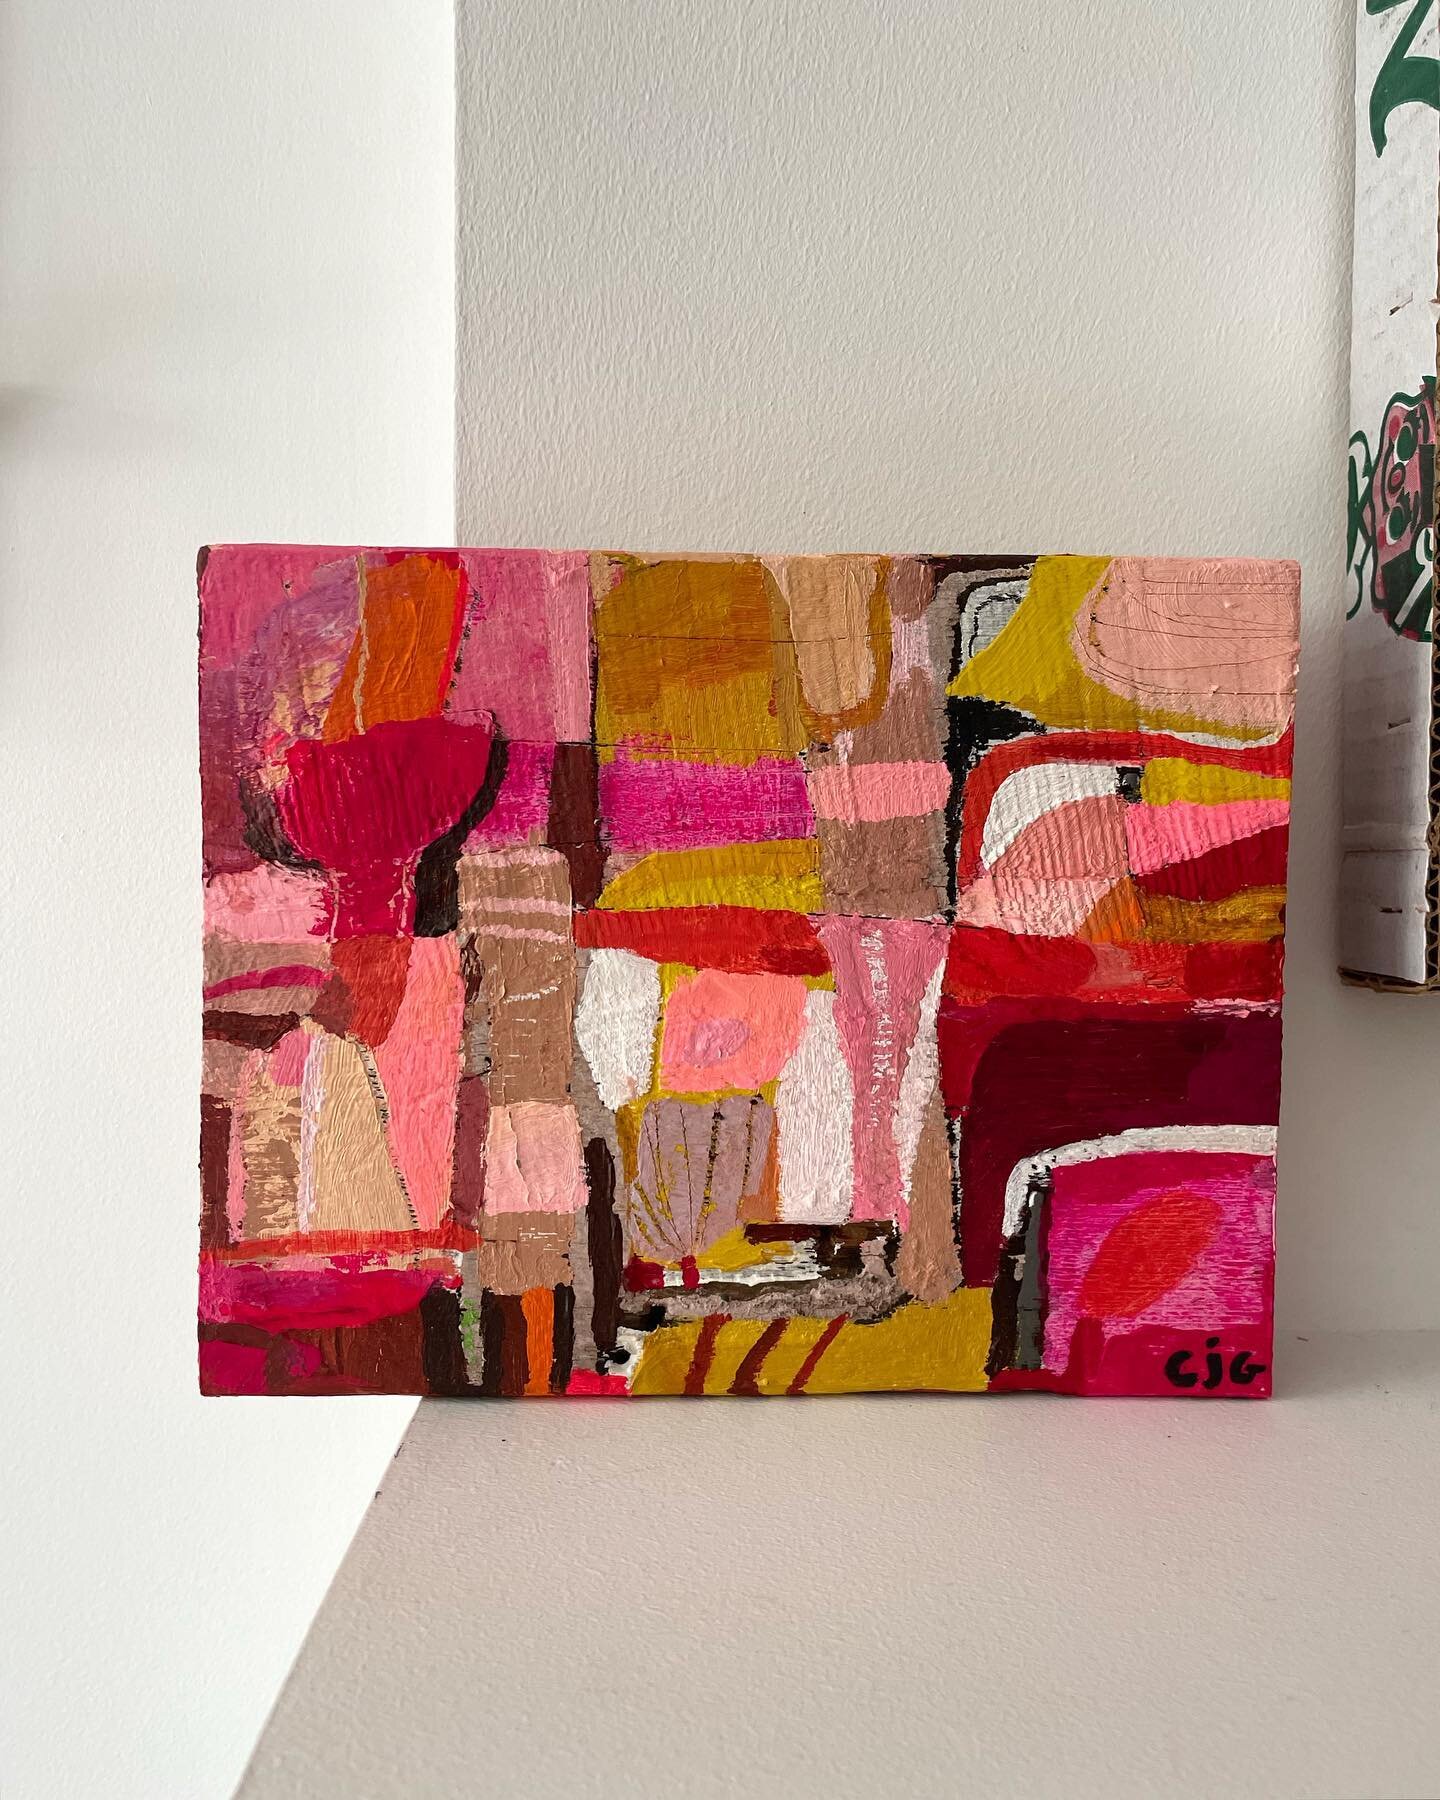 Chipotle. Latest. Abstract on reclaimed Douglas Fir.  10.25 x 8 x 2&rdquo;. Dm if you&rsquo;re interested. #carolyngavin #abstract #abstractlove abstractseries #carolyngavinabstract #chipotle #originalart #artcollector #artcollection